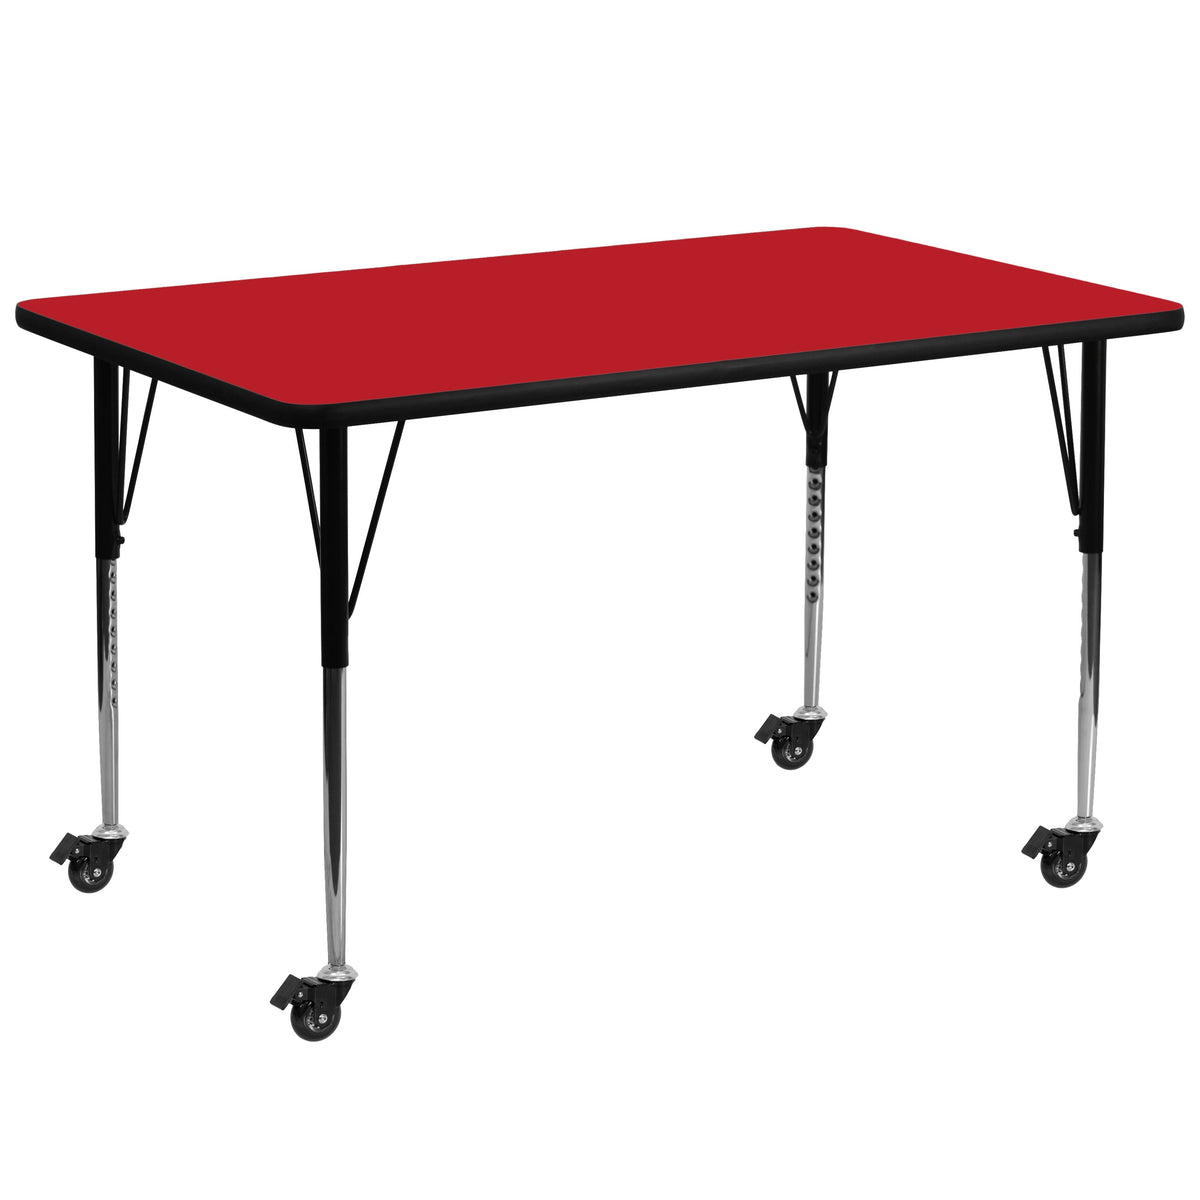 Red |#| Mobile 30inchW x 72inchL Rectangular Red HP Laminate Adjustable Activity Table